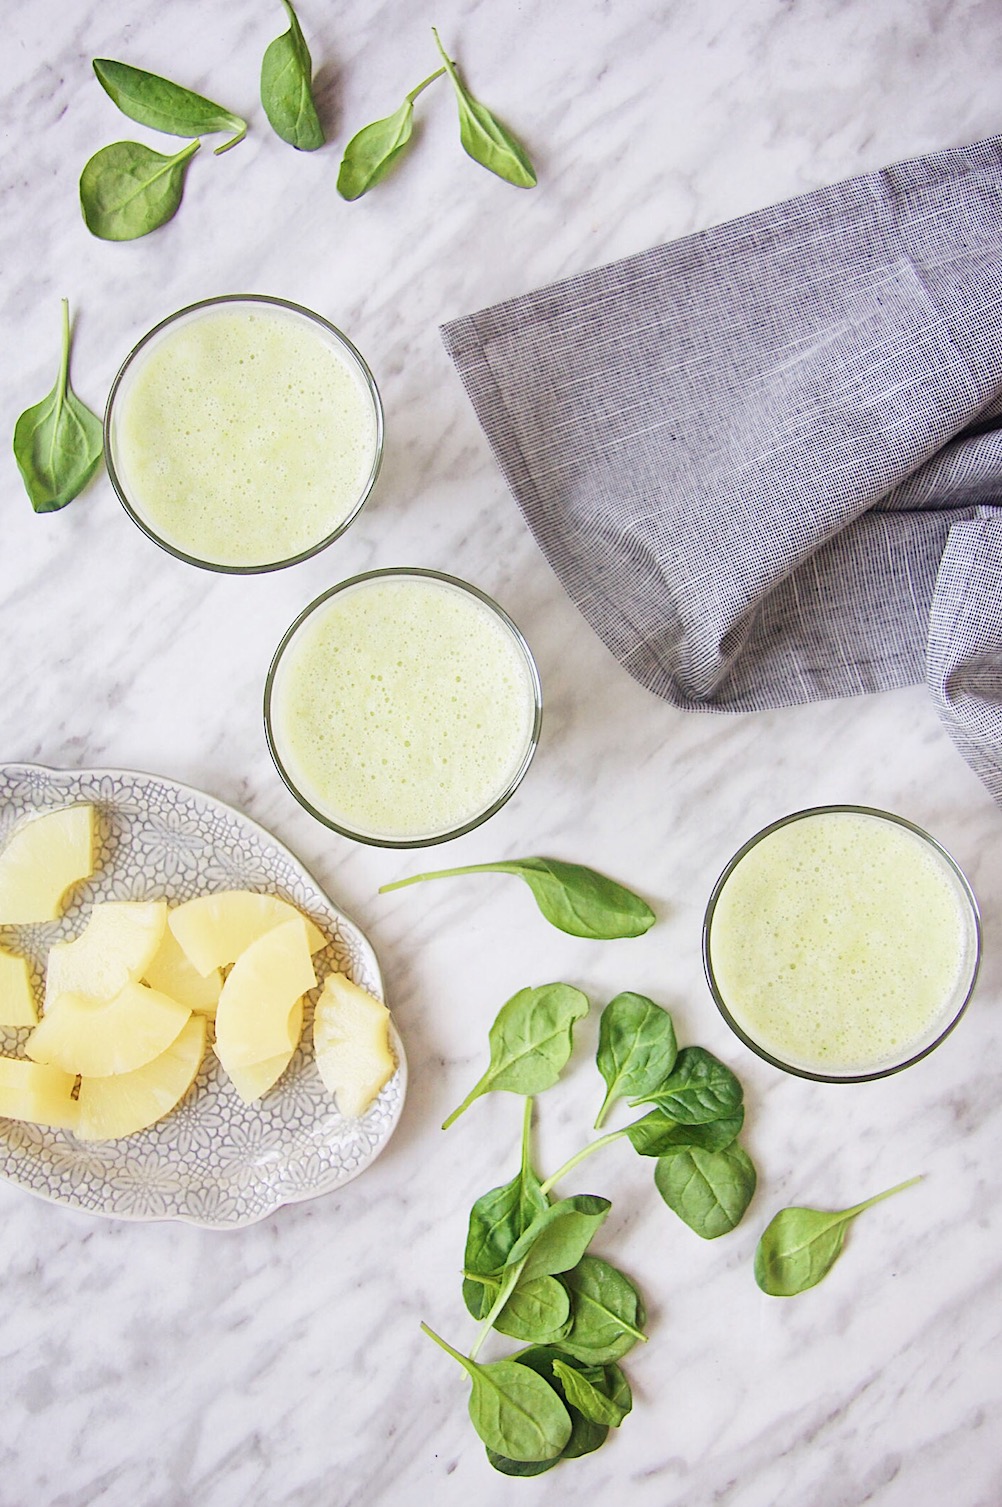 Want More Energy? Kickstart Your Day With A Pineapple Green Smoothie